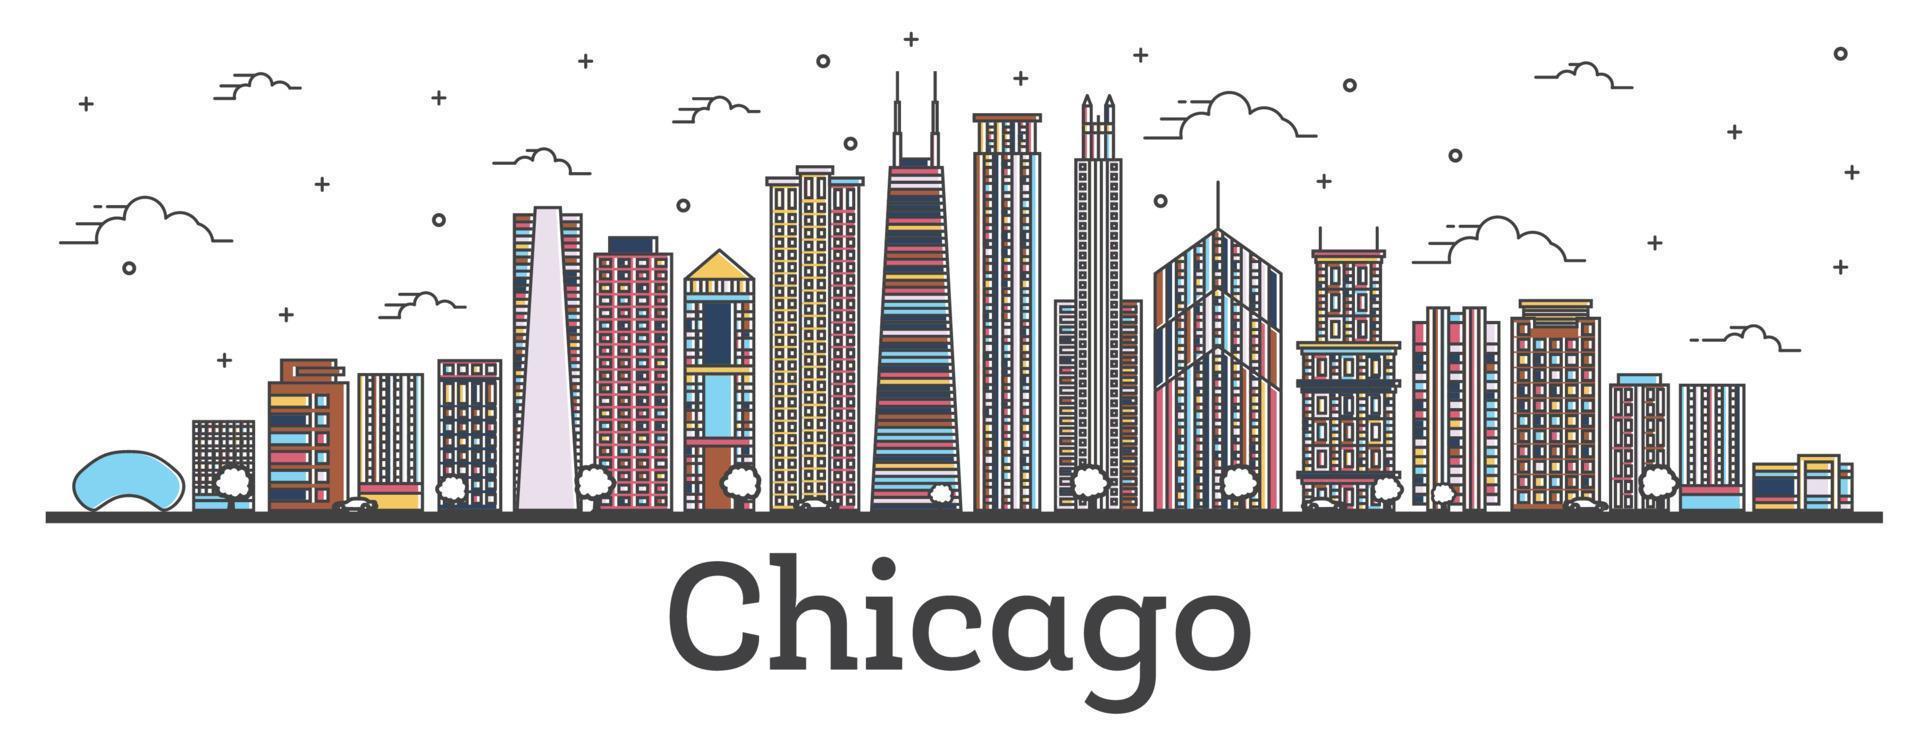 Outline Chicago Illinois City Skyline with Color Buildings Isolated on White. vector